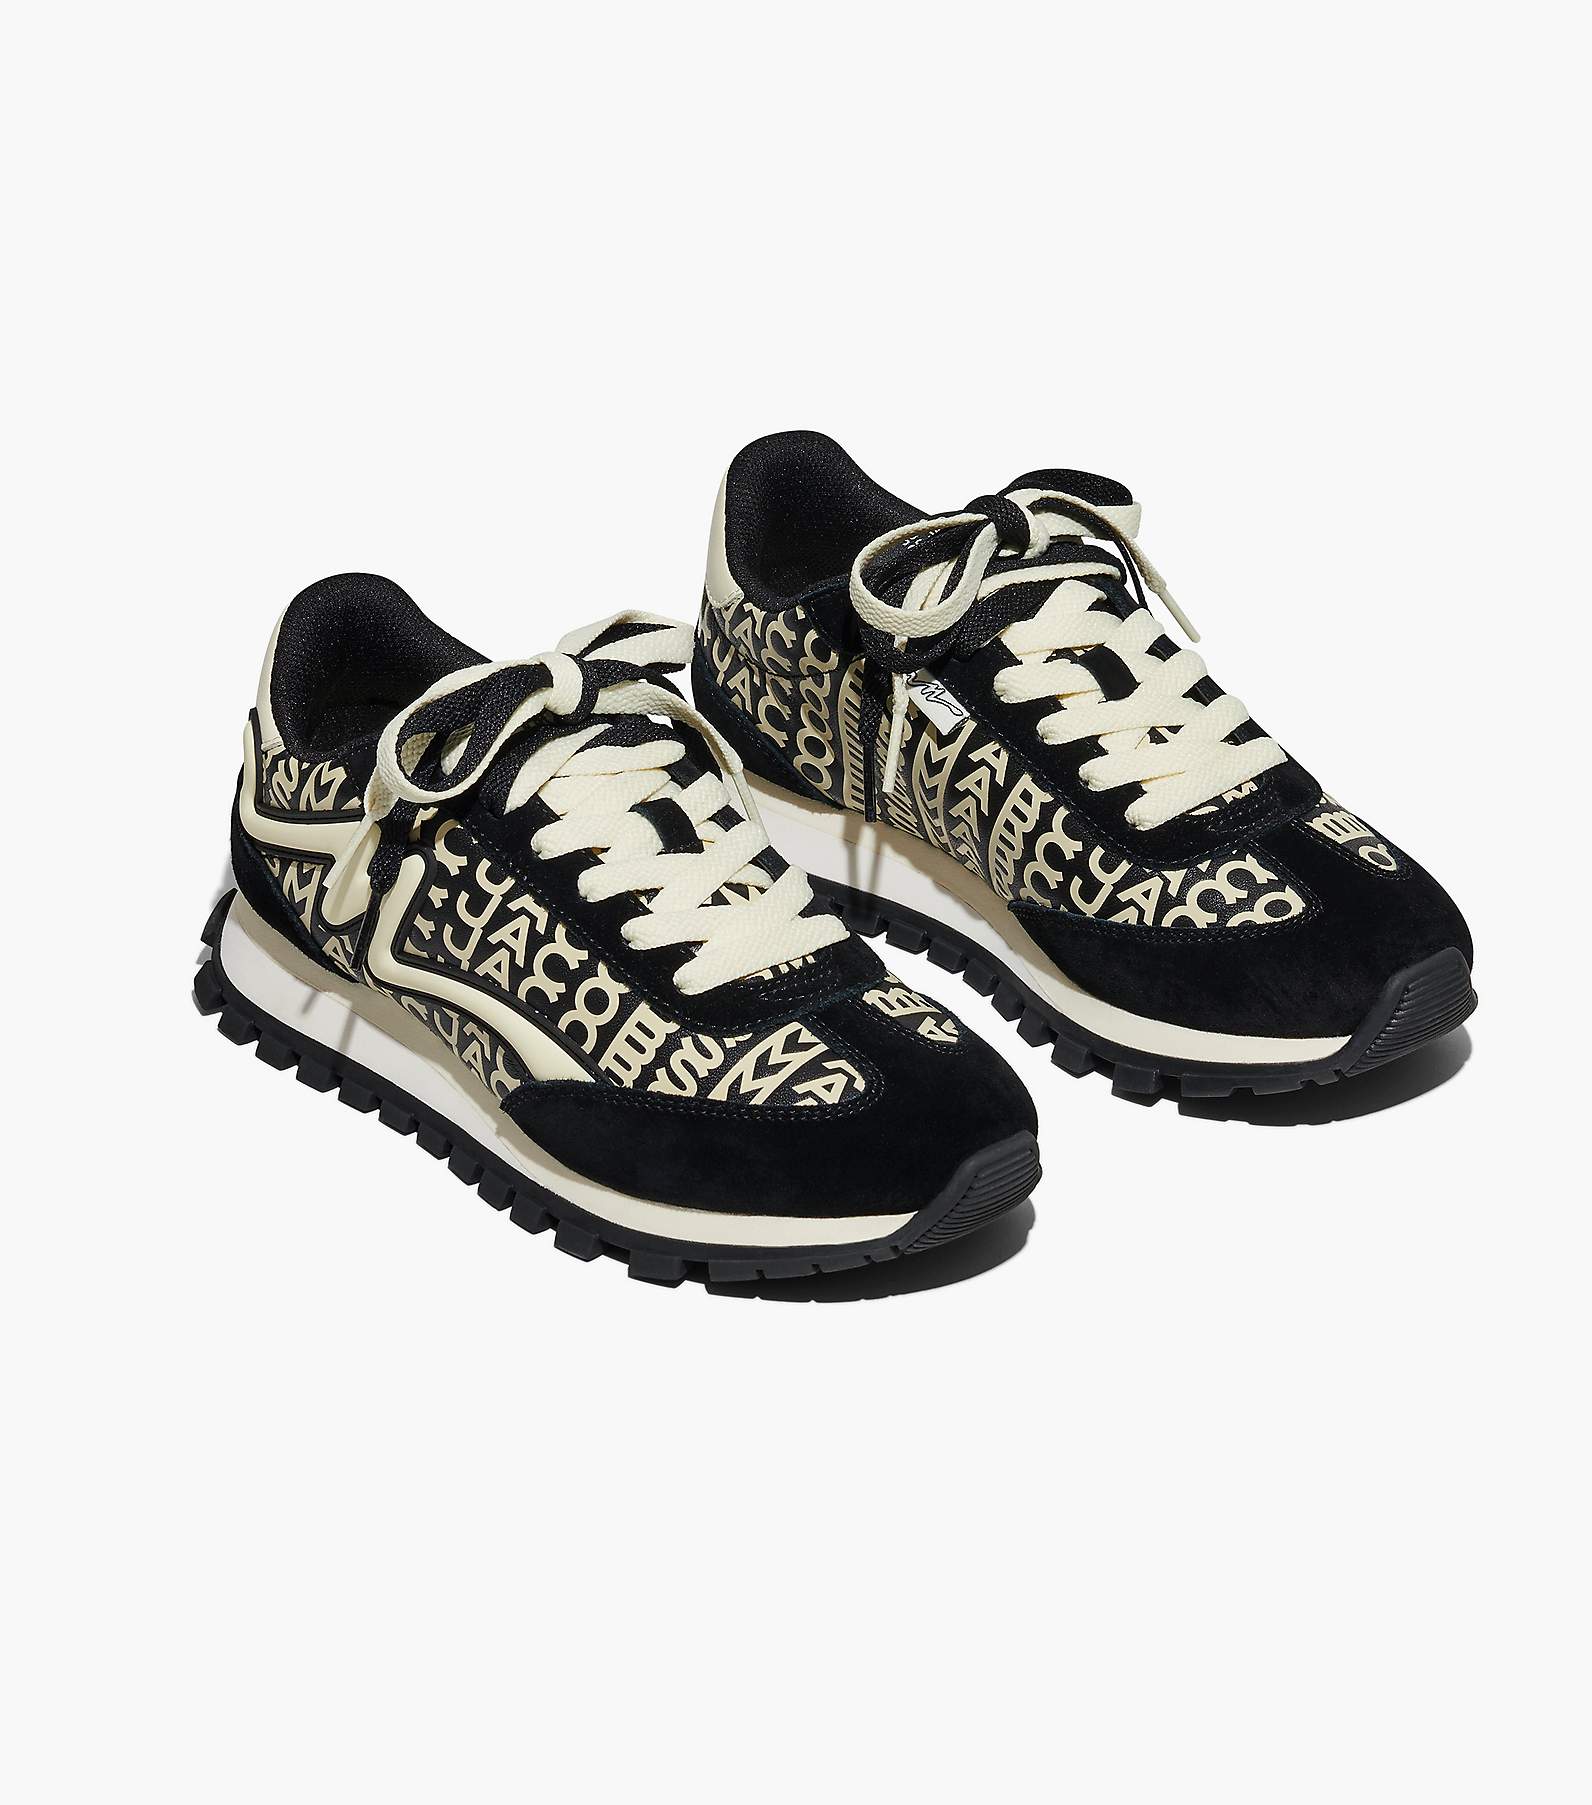 Marc Jacobs Black 'The Teddy Jogger' Sneakers Marc Jacobs